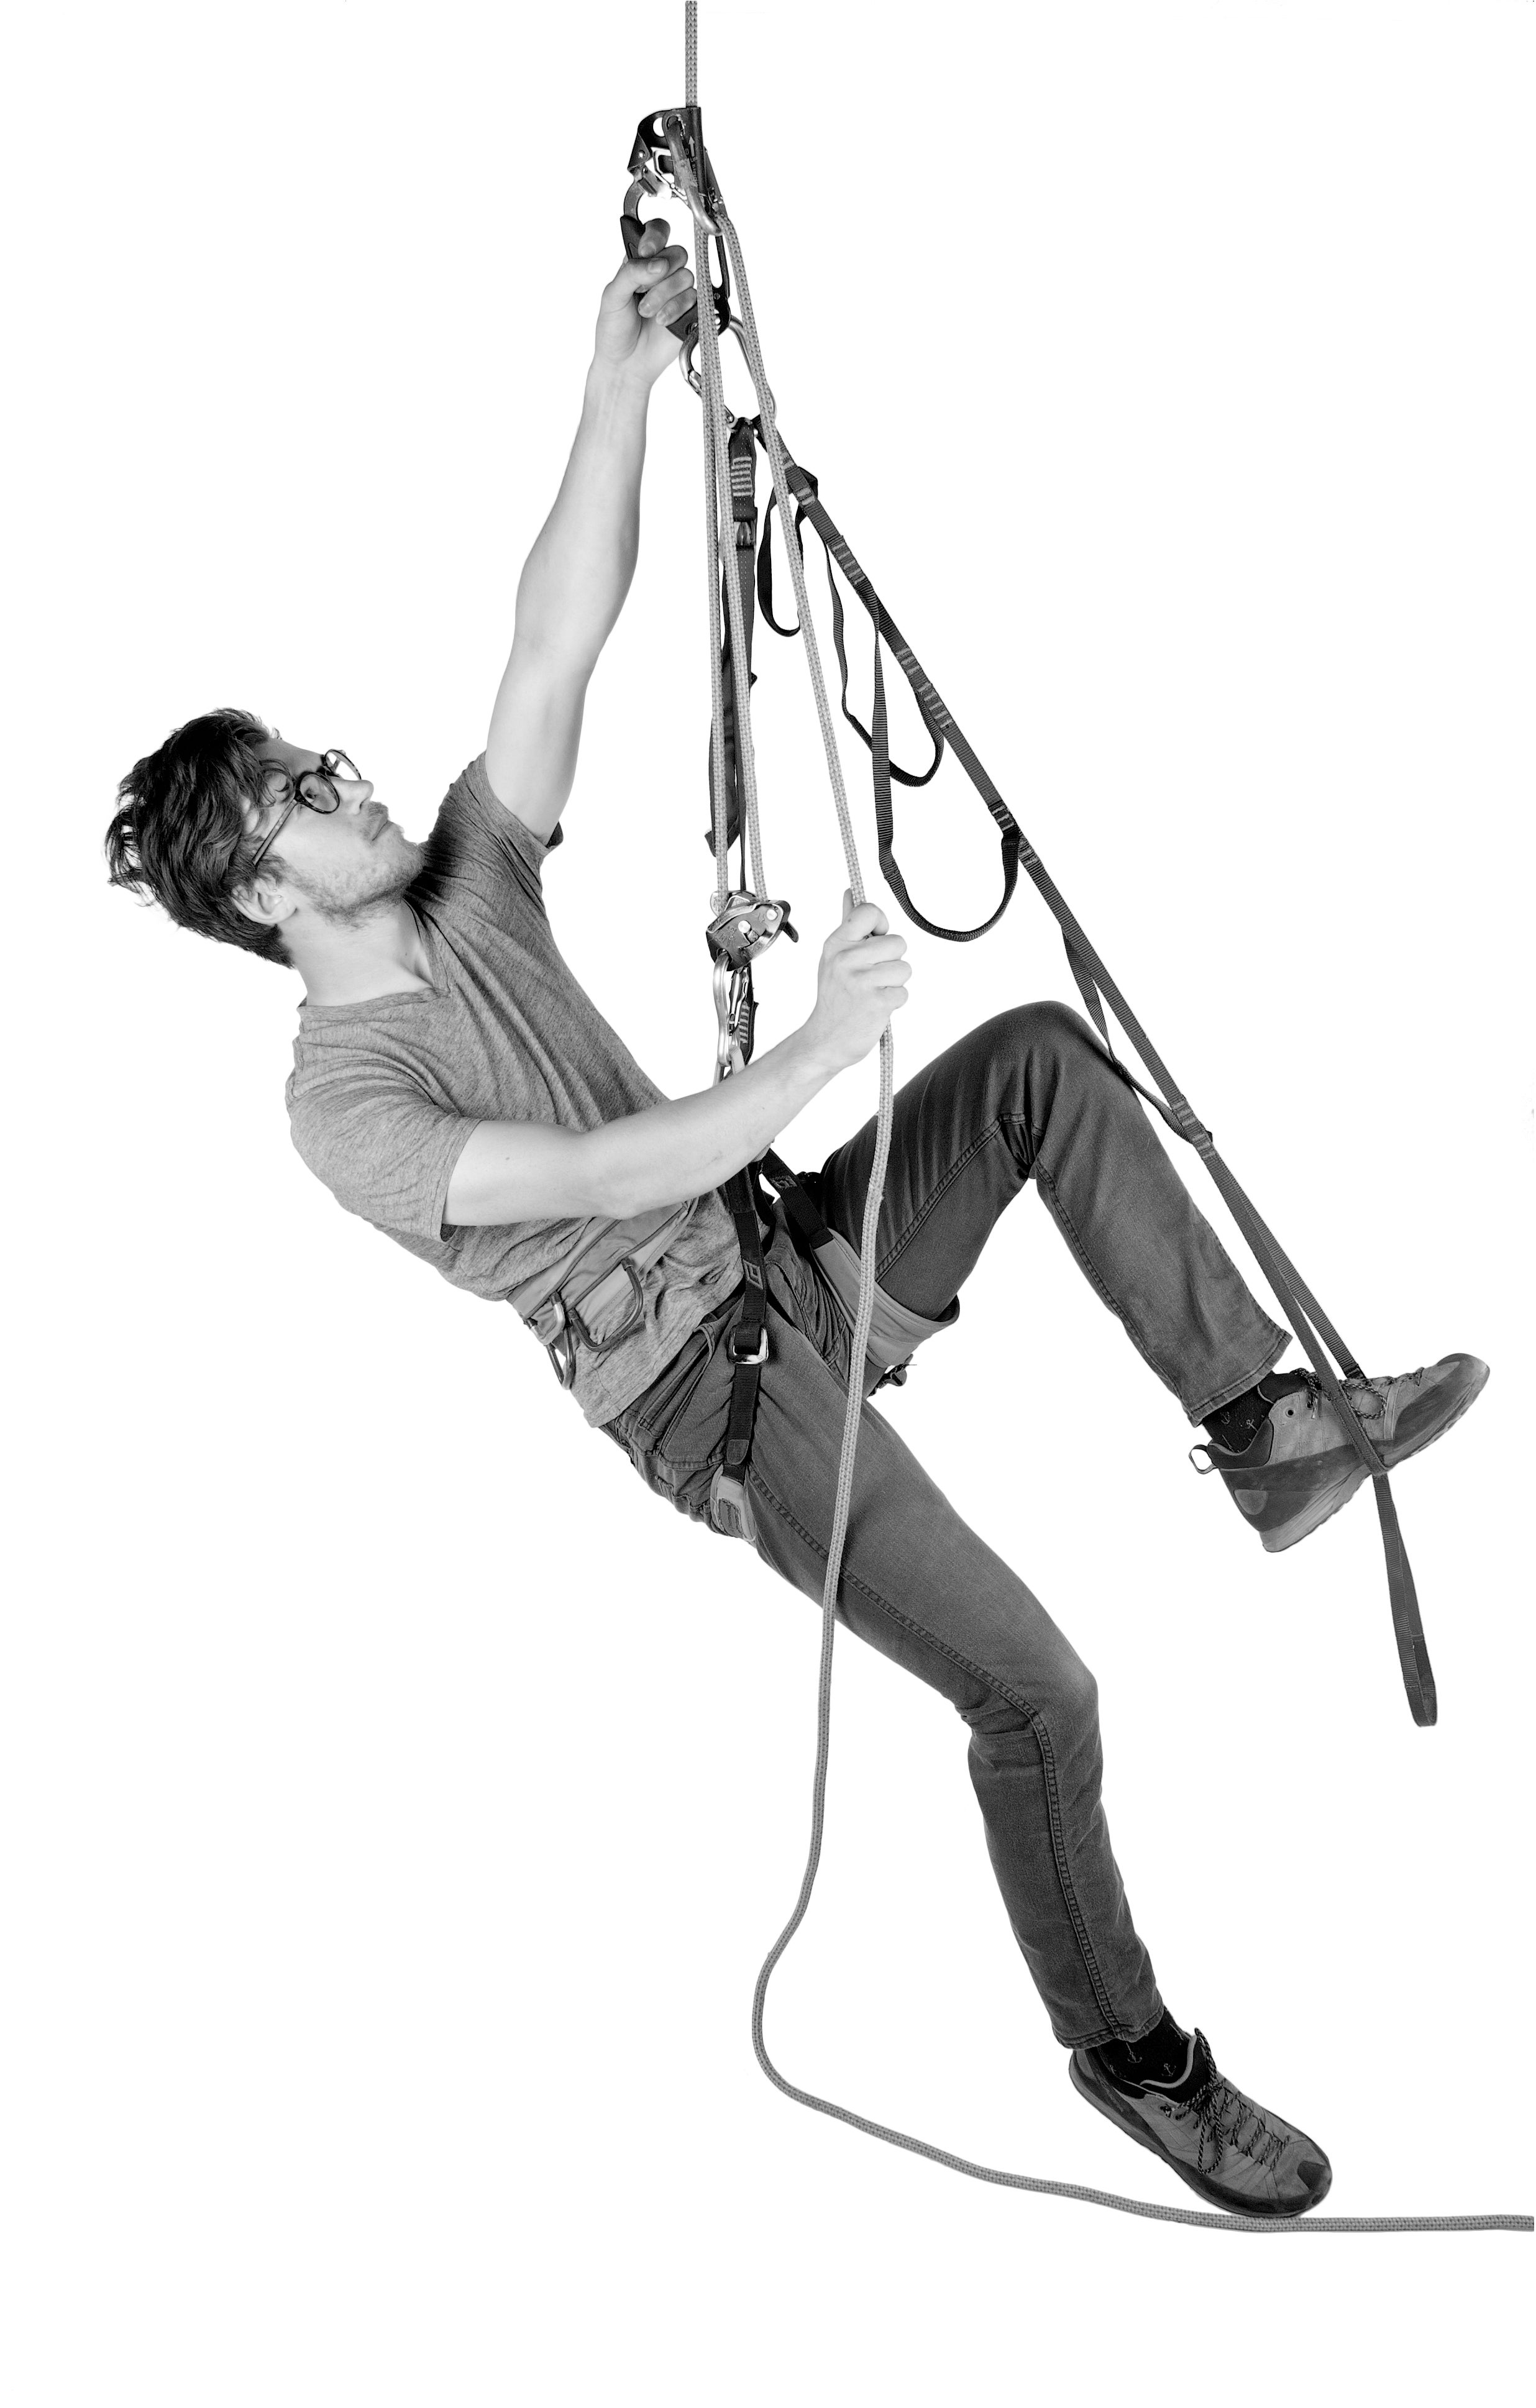 Learn This: How to Jug a Rope - Climbing